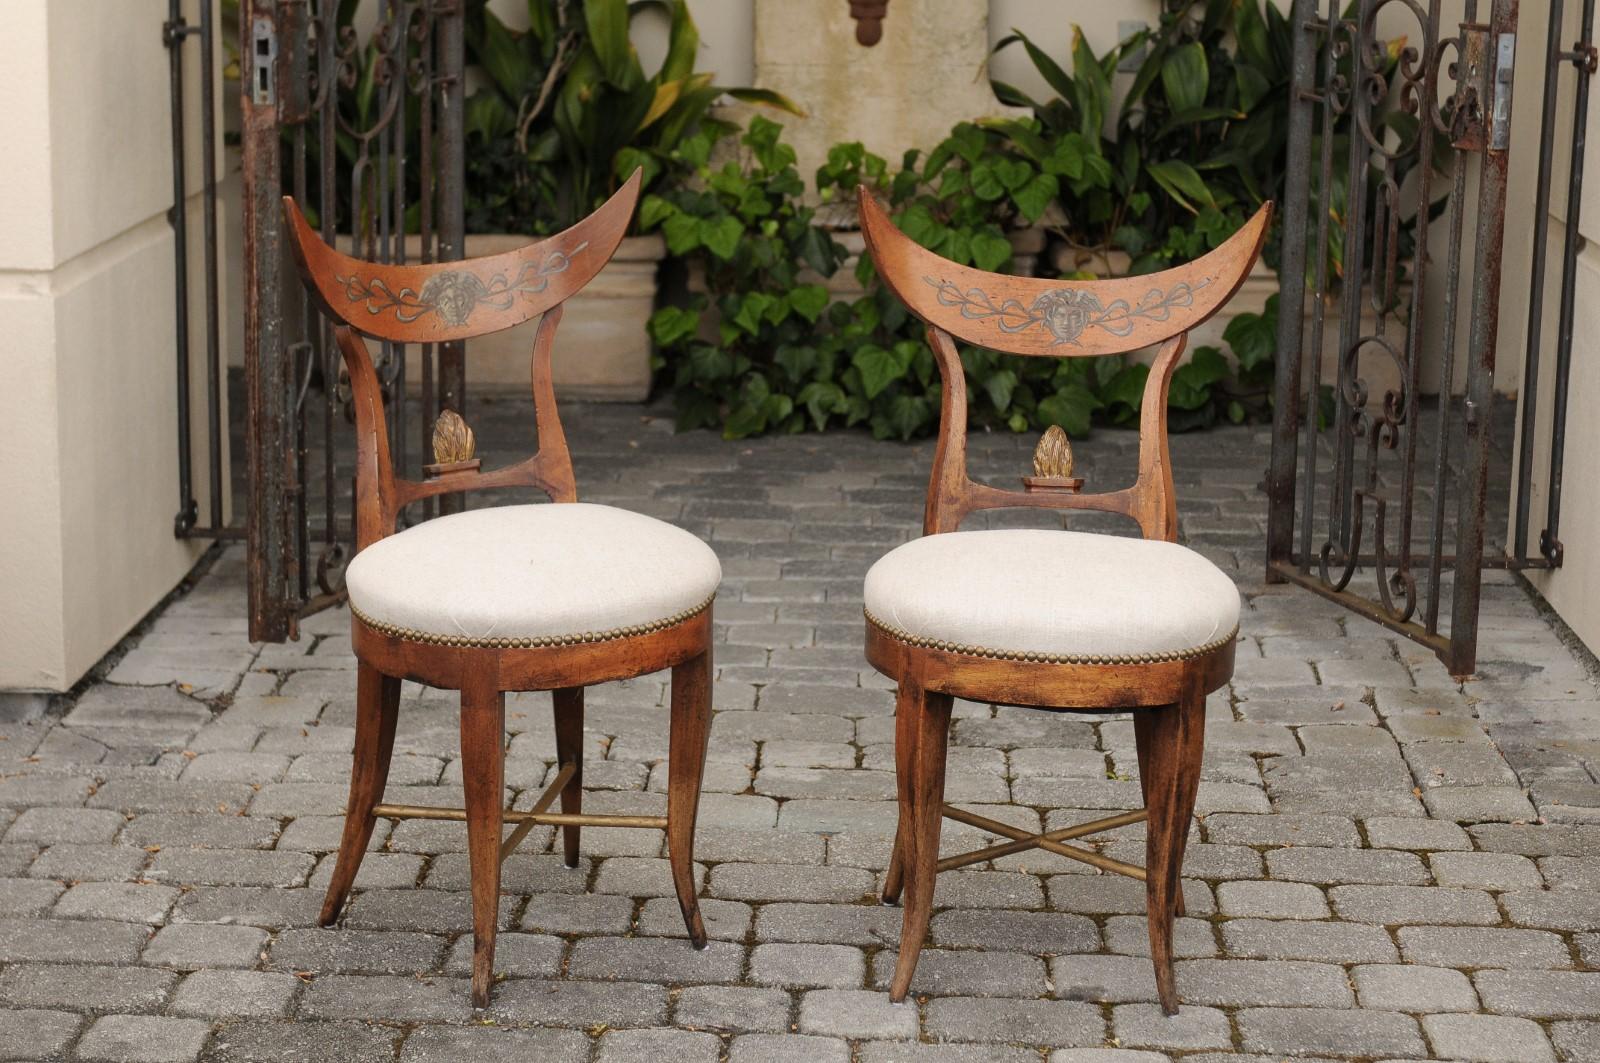 Pair of Italian 1860s Upholstered Side Chairs with Crescent Backs and Saber Legs For Sale 2